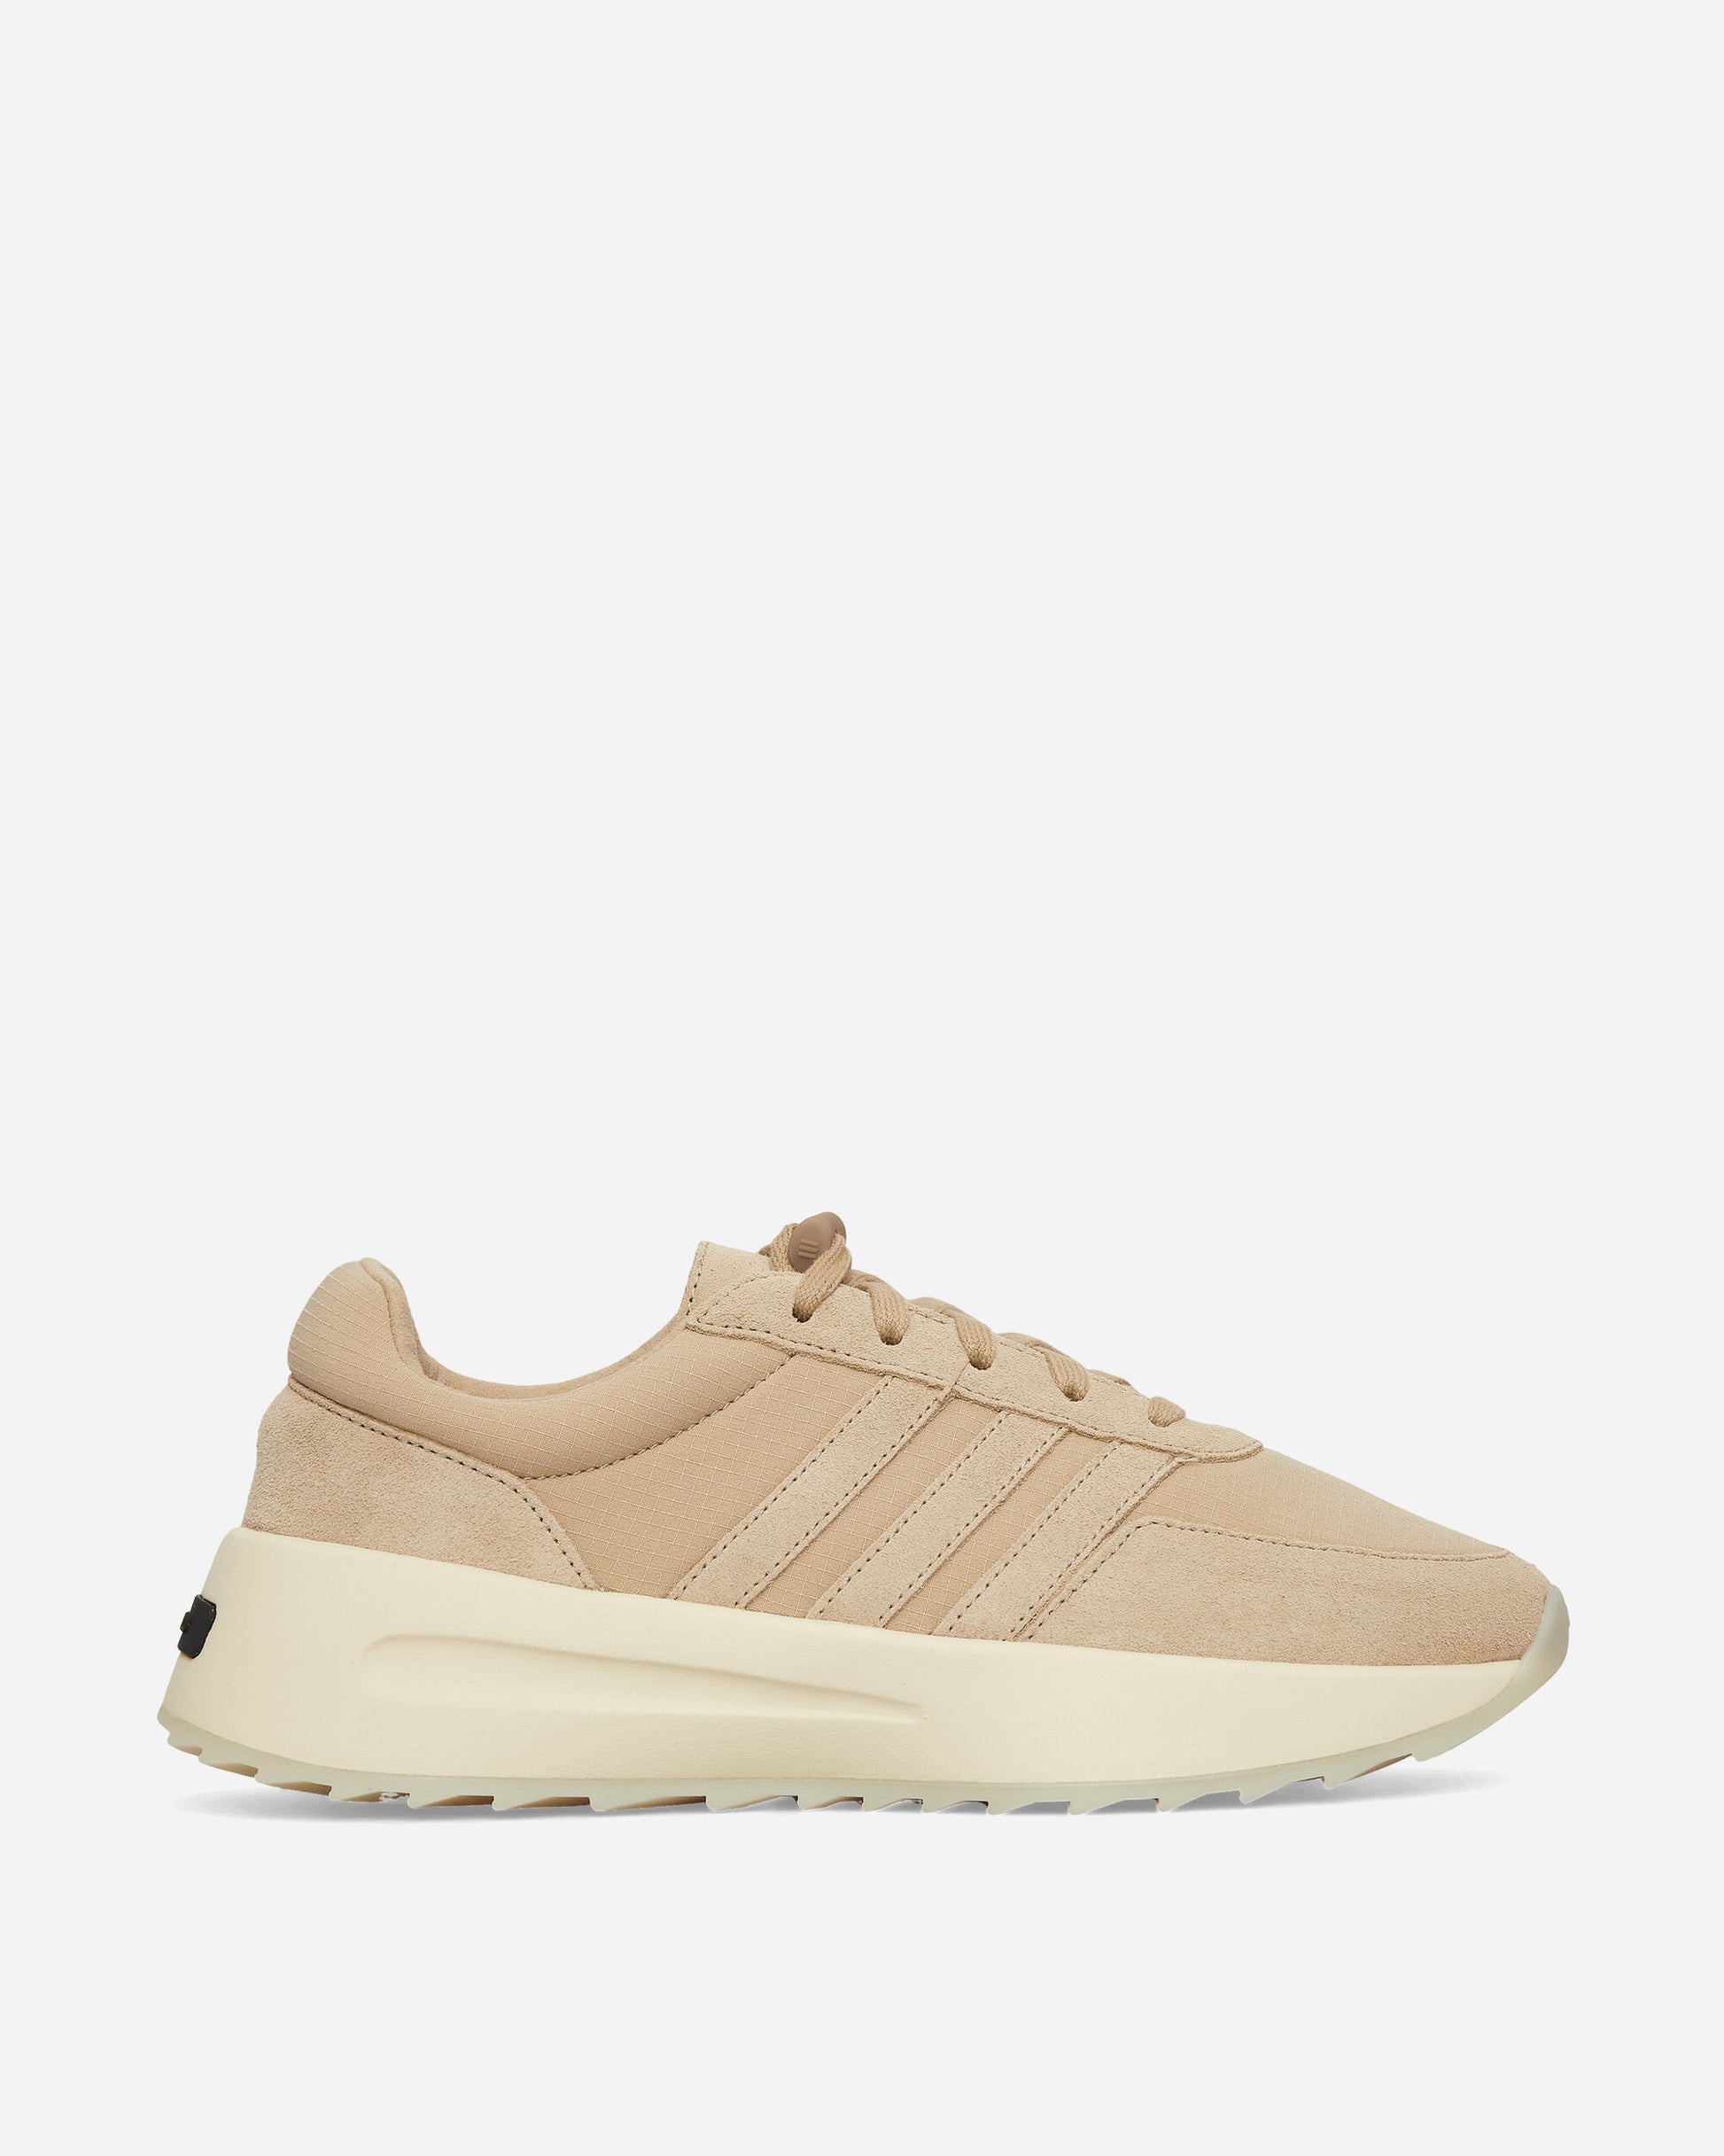 adidas Athletics Los Angeles Clay/Clay Sneakers Low IF4215 001